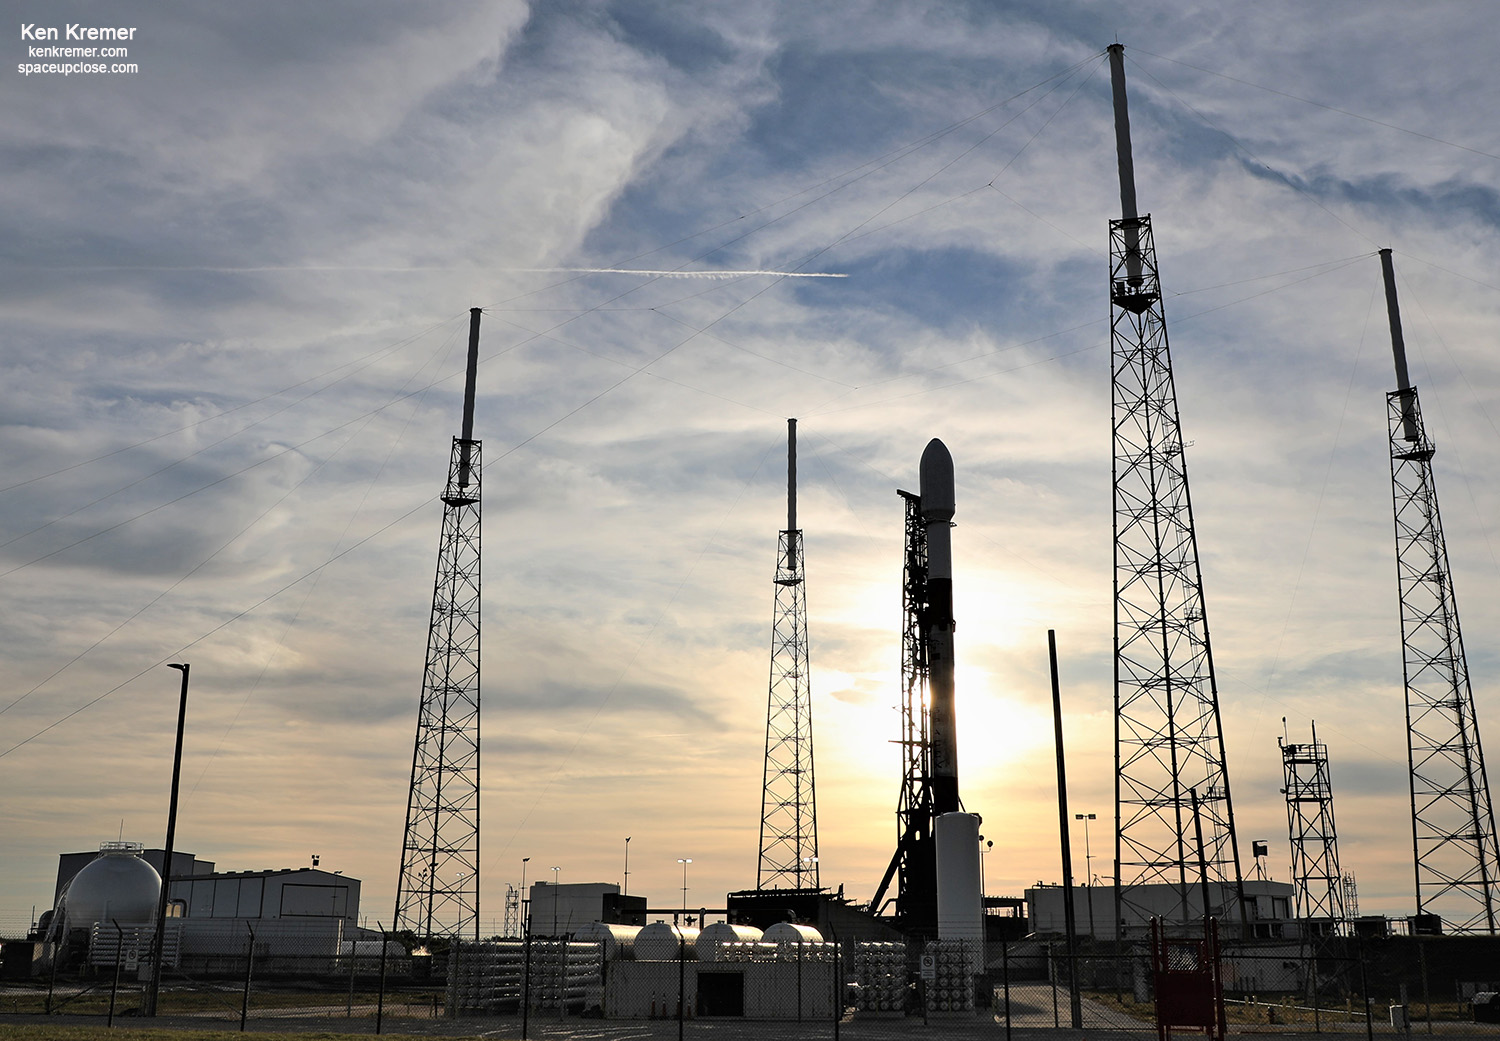 SpaceX Next Starlink Launch Set for Jan. 27, Weather Permitting: Watch Live/Photos